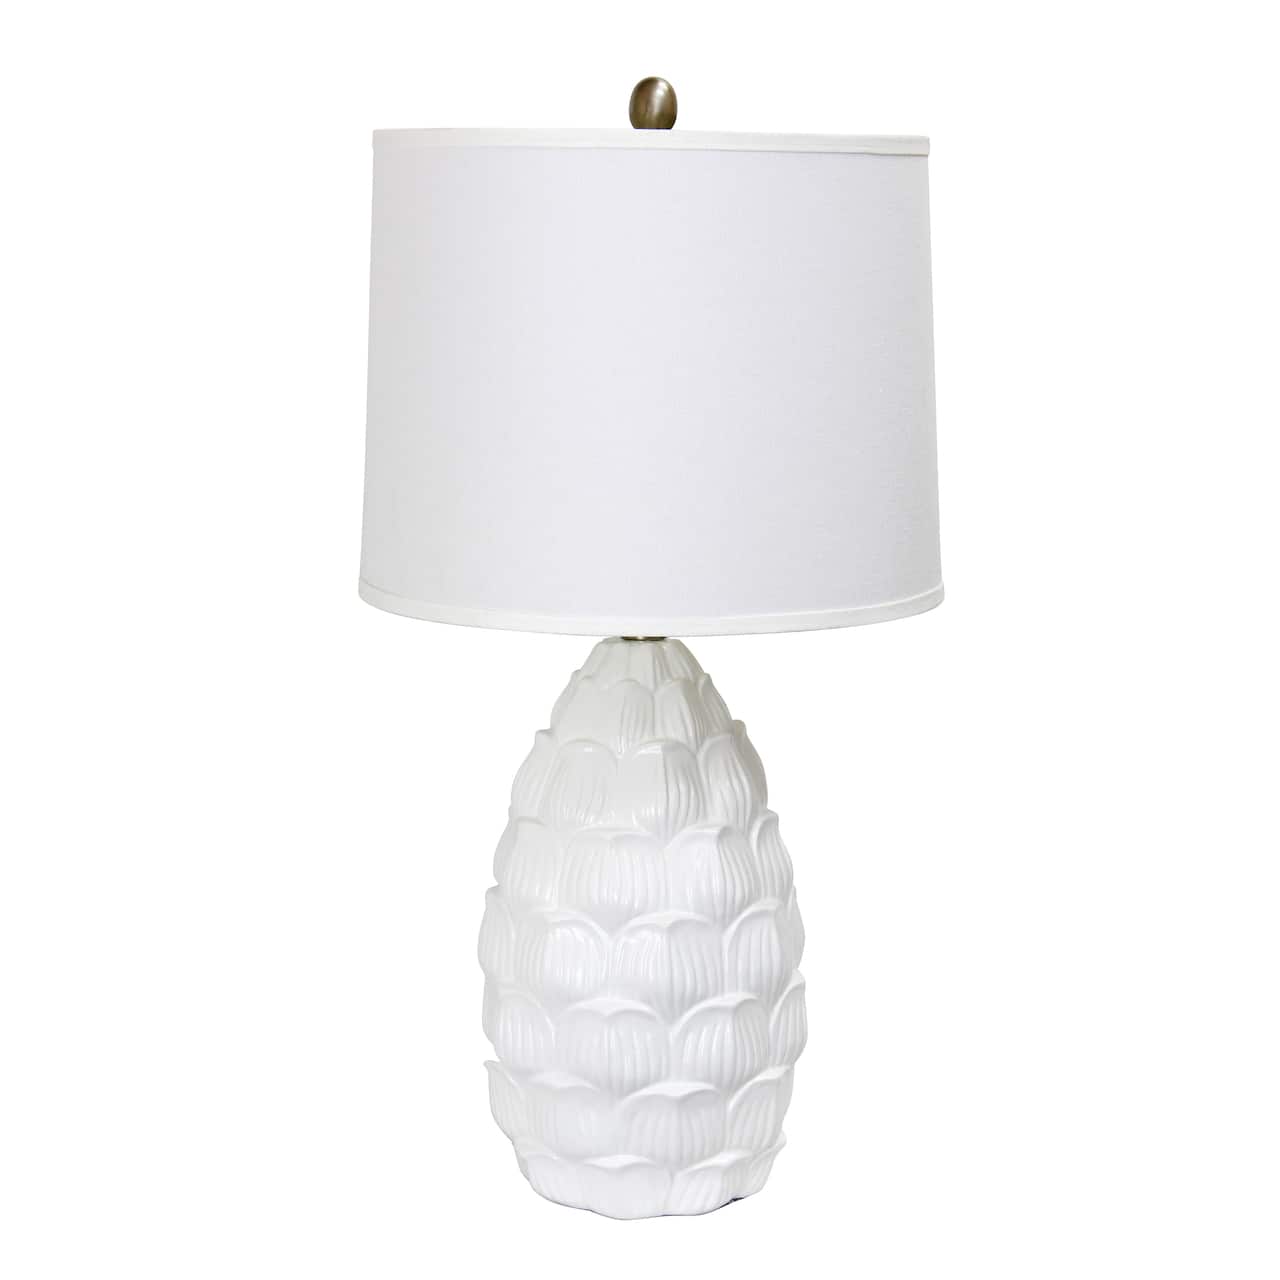 Elegant Designs White Table Lamp with Fabric Shade